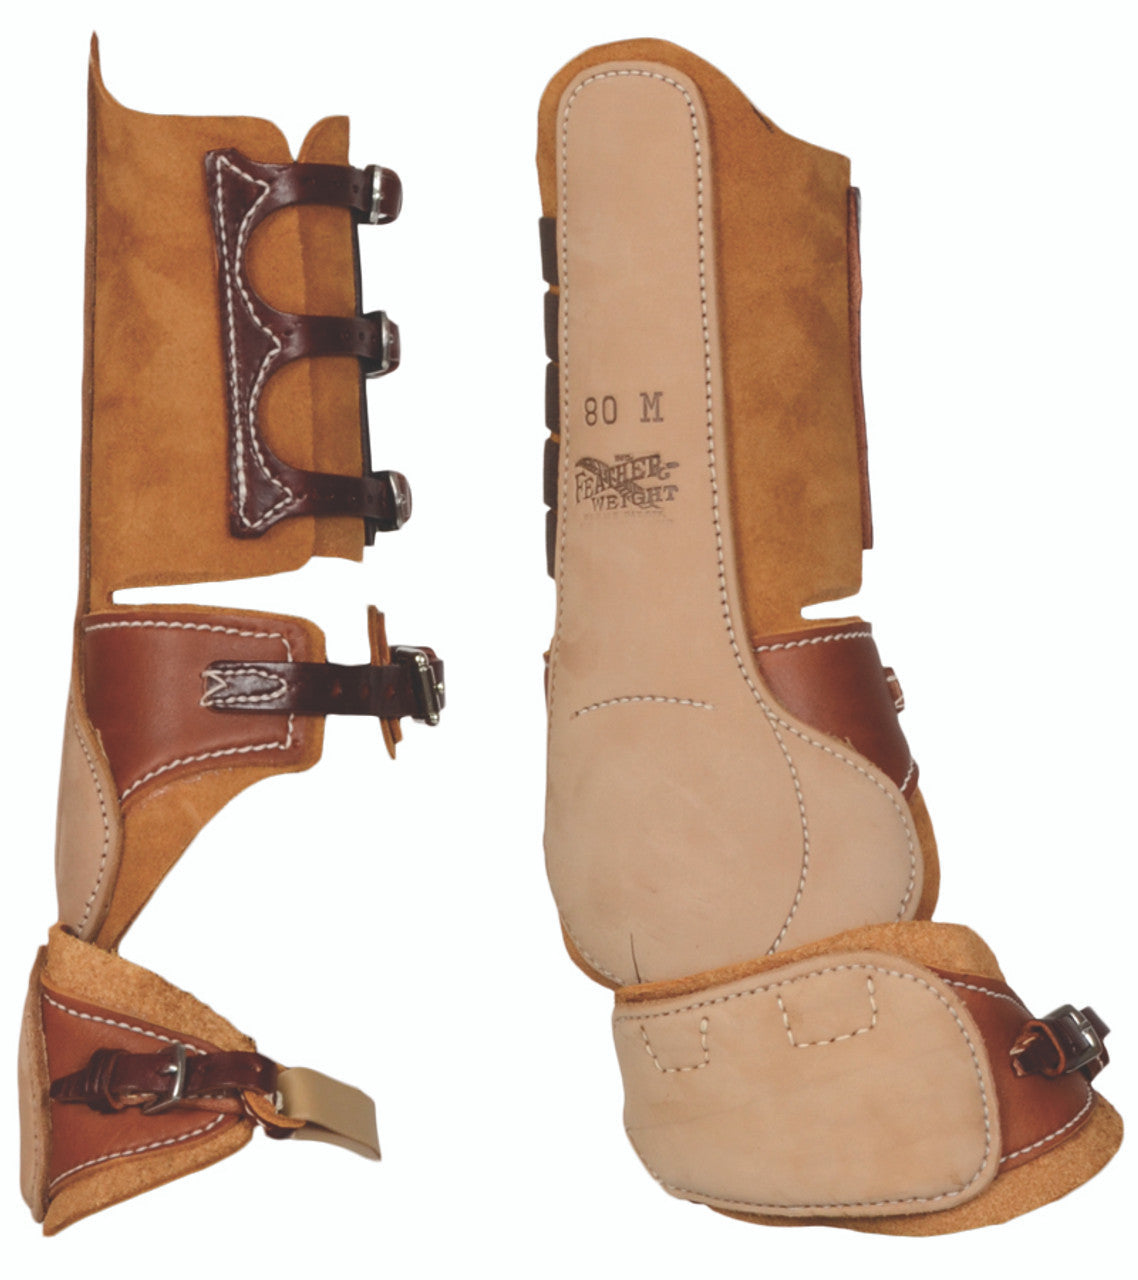 Feather-Weight Hind, Shin & Ankle Boots-TexanSaddles.com